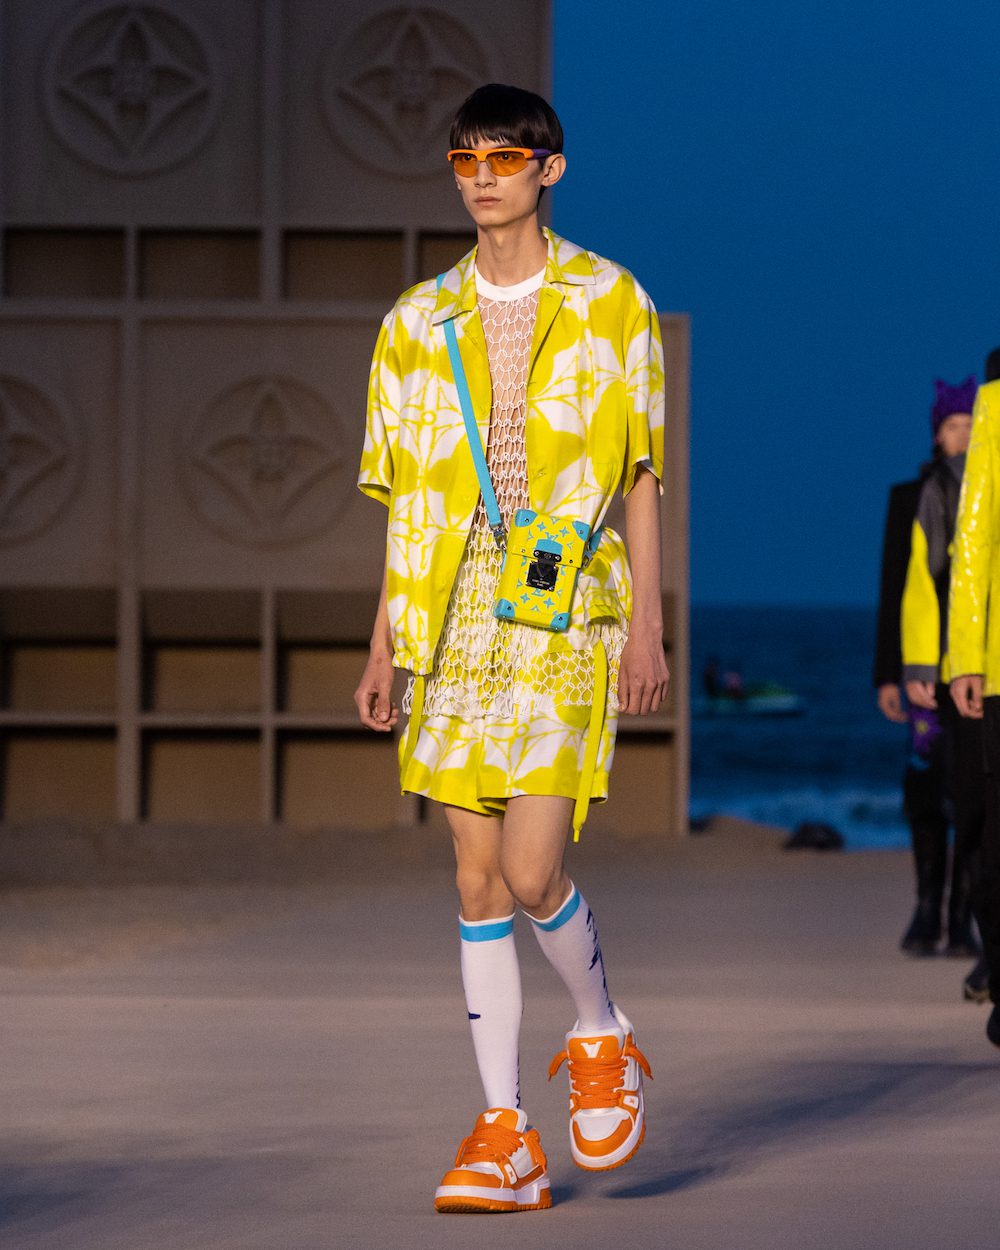 Louis Vuitton Presents its Men's Spring/Summer 2022 Spin-off